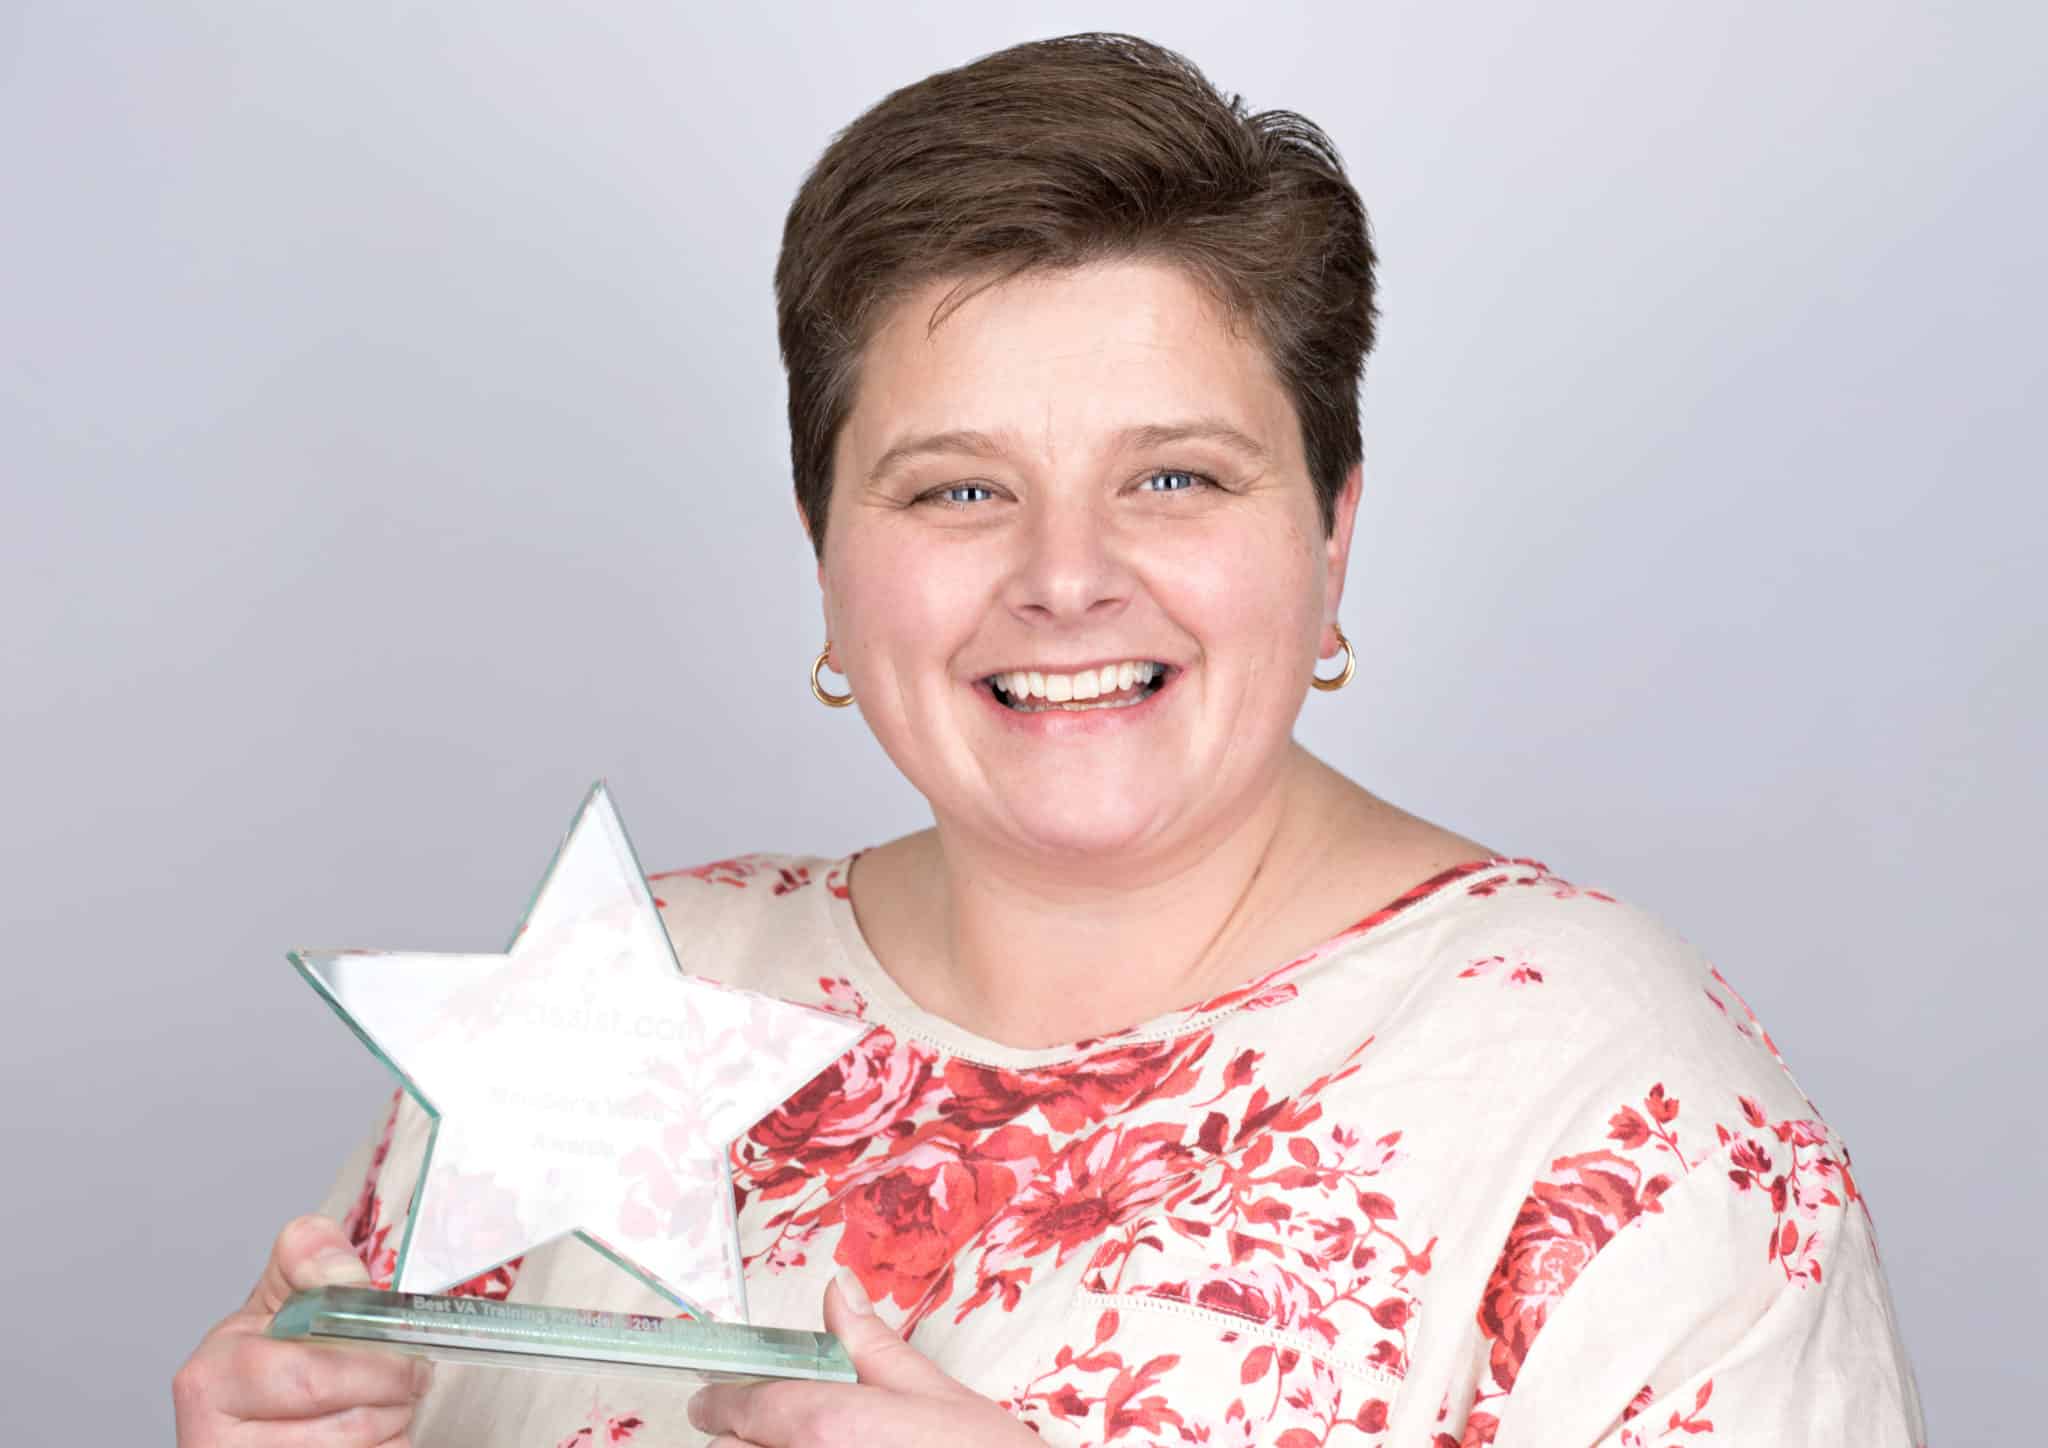 Amanda Johnson – Winner VACT announced as the “Winner for Virtual Assistant Training Provider UK – 2016 in the pa-assist.com Members Voice Awards”